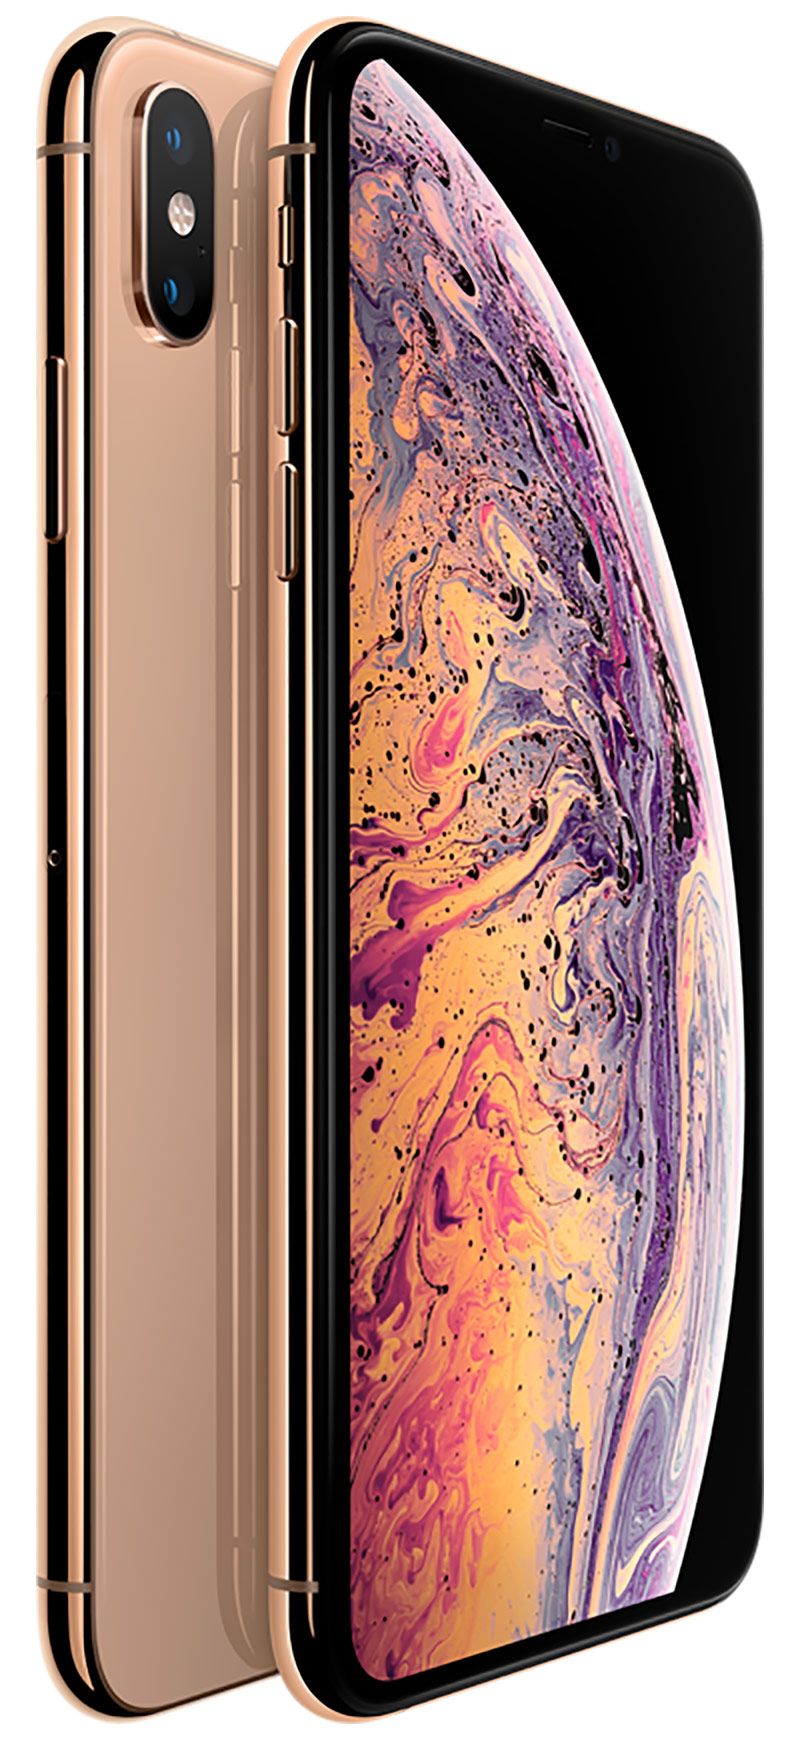 Apple iPhone Xs Max or 256Go